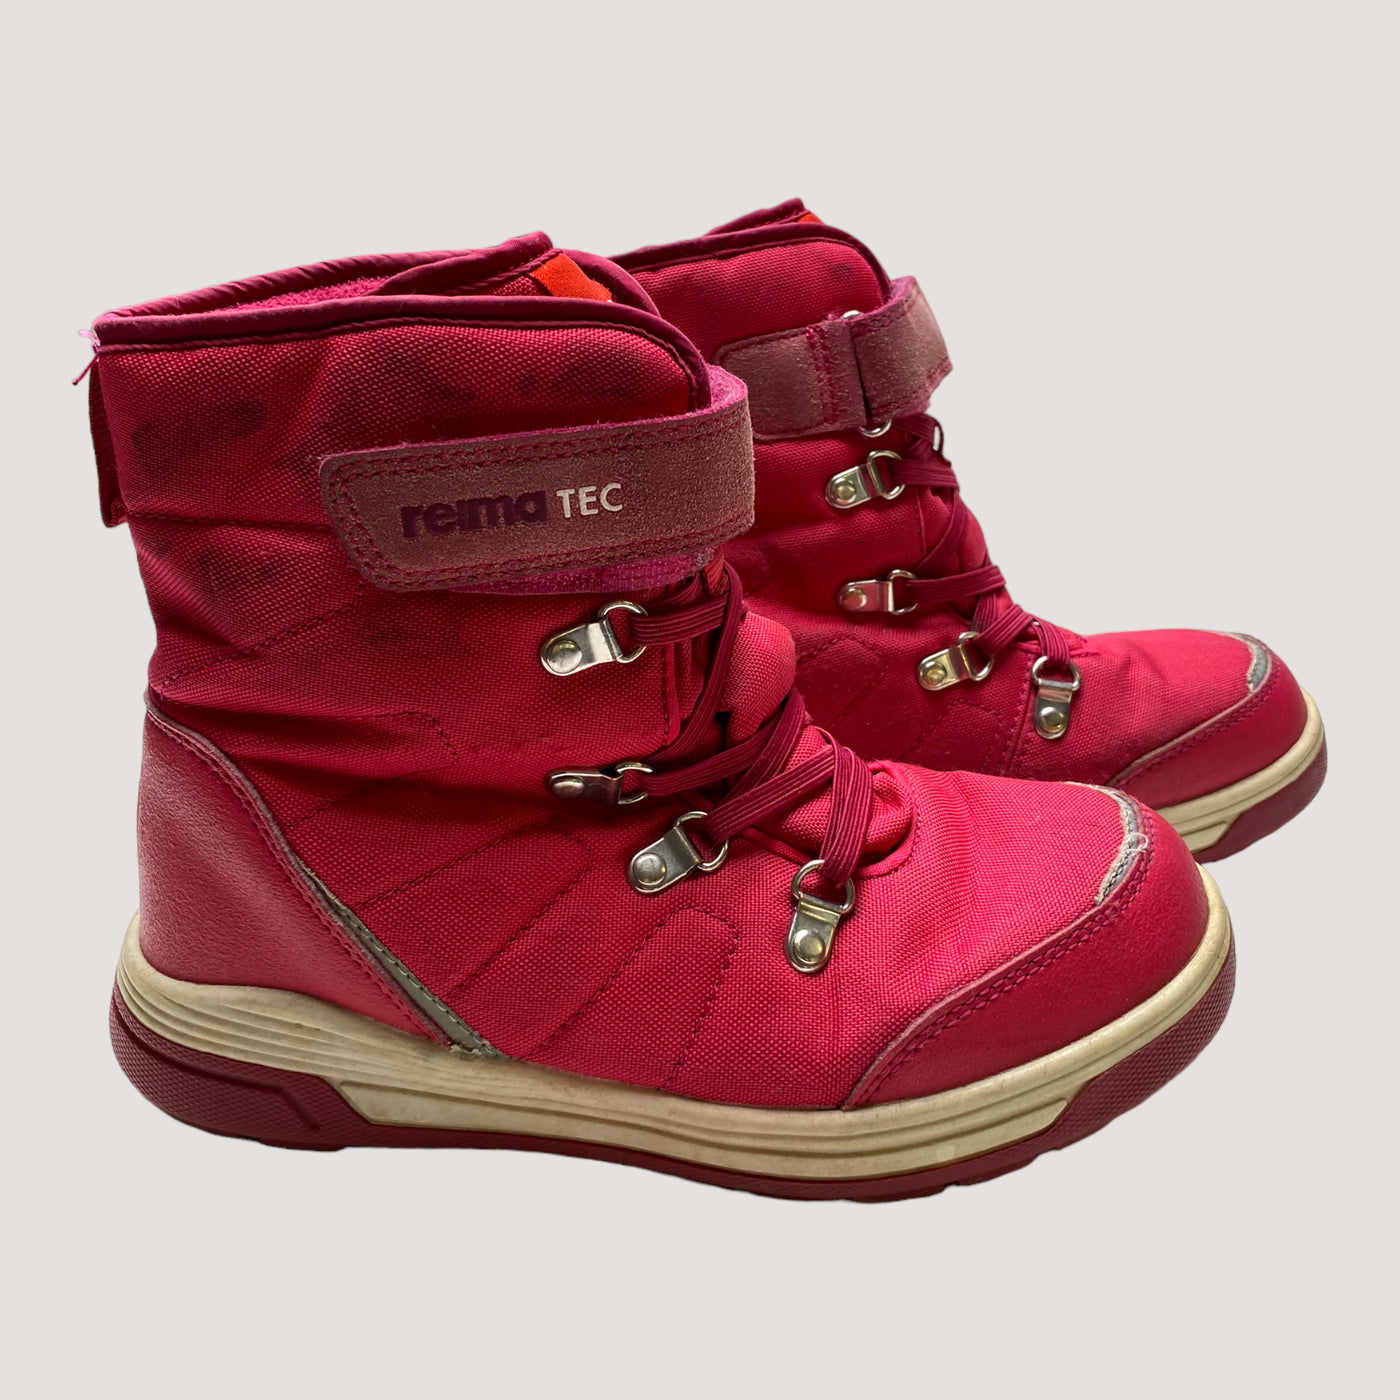 Reima padded winter boots, hot pink | 35